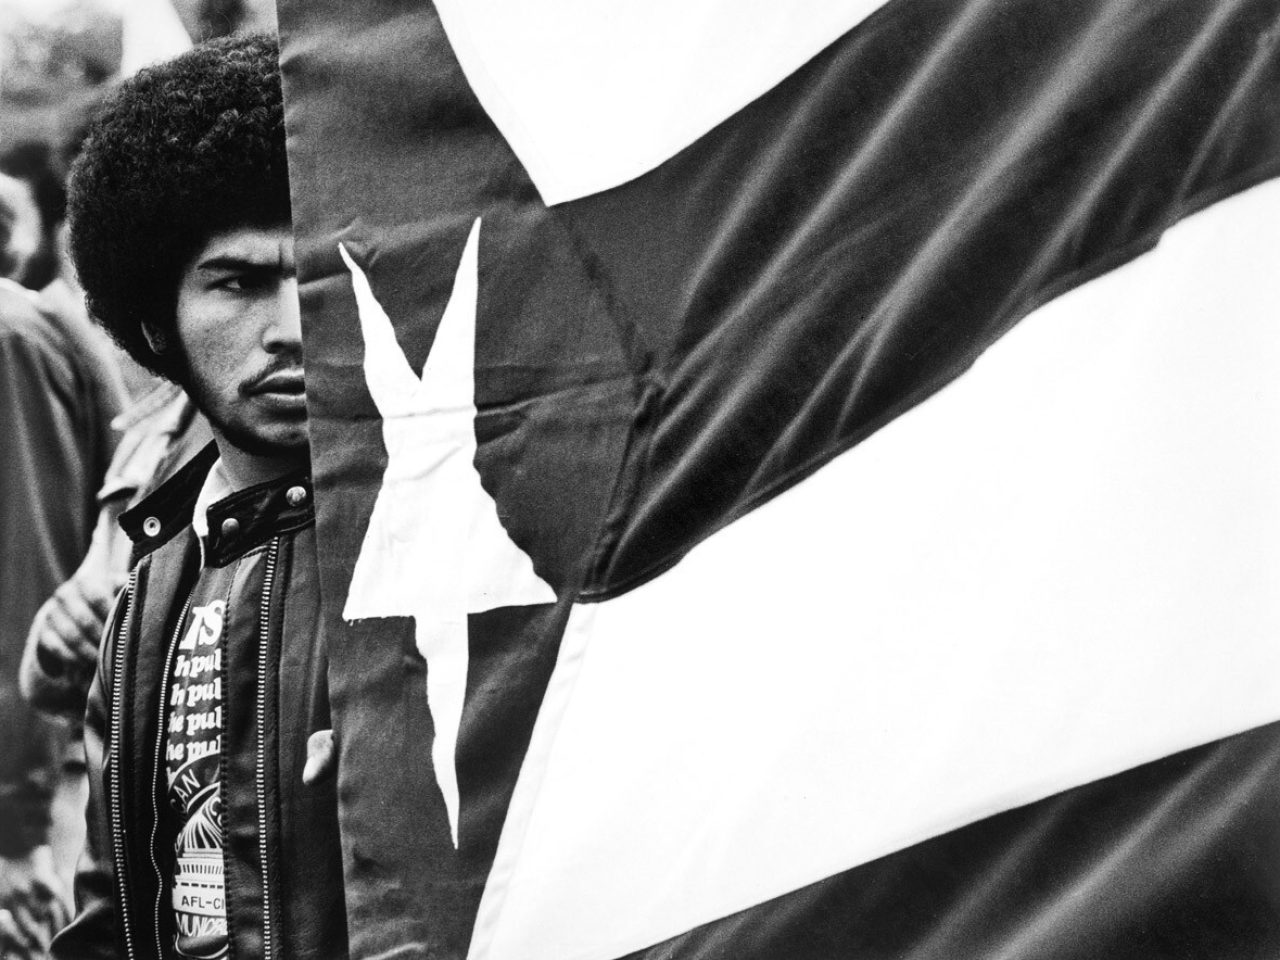 Black and white photograph of a man next to Puerto Rican flag.